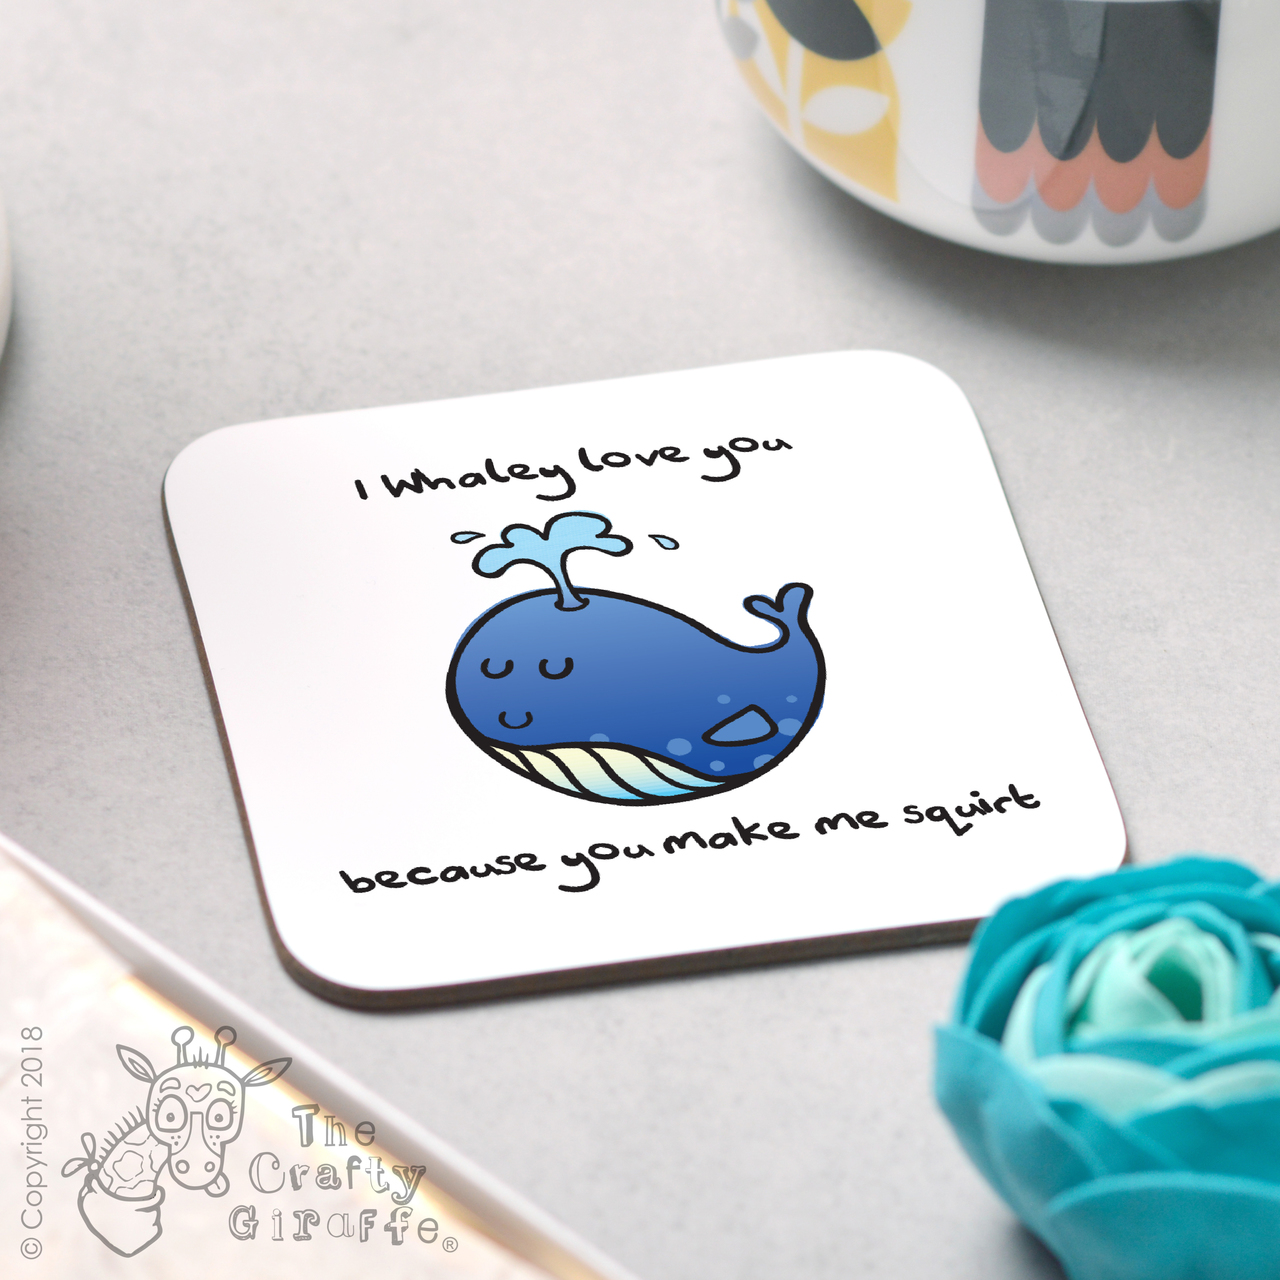 I whaley love you because you make me squirt Coaster